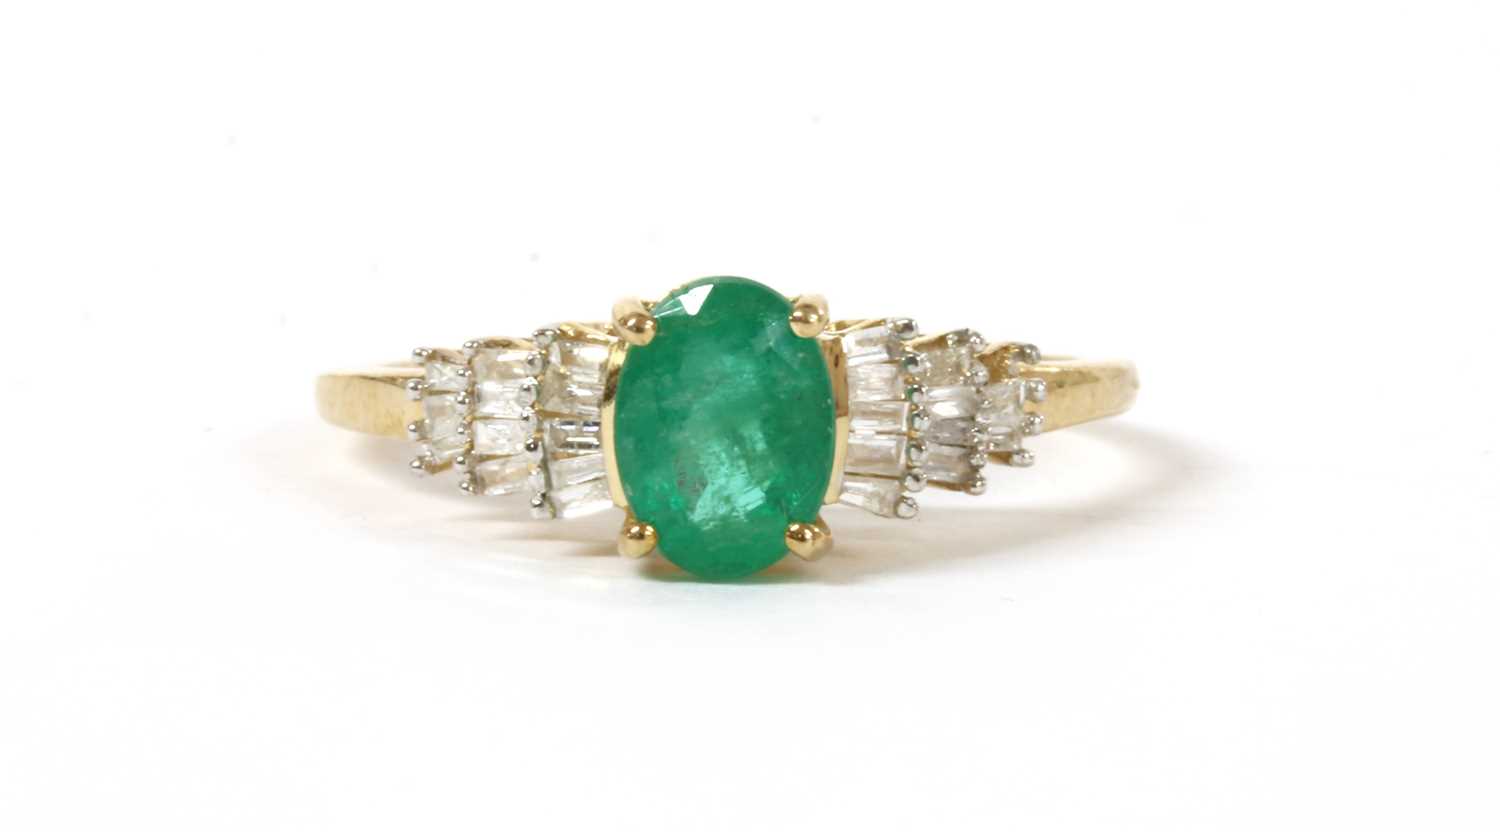 Lot 142 - A gold emerald and diamond ring